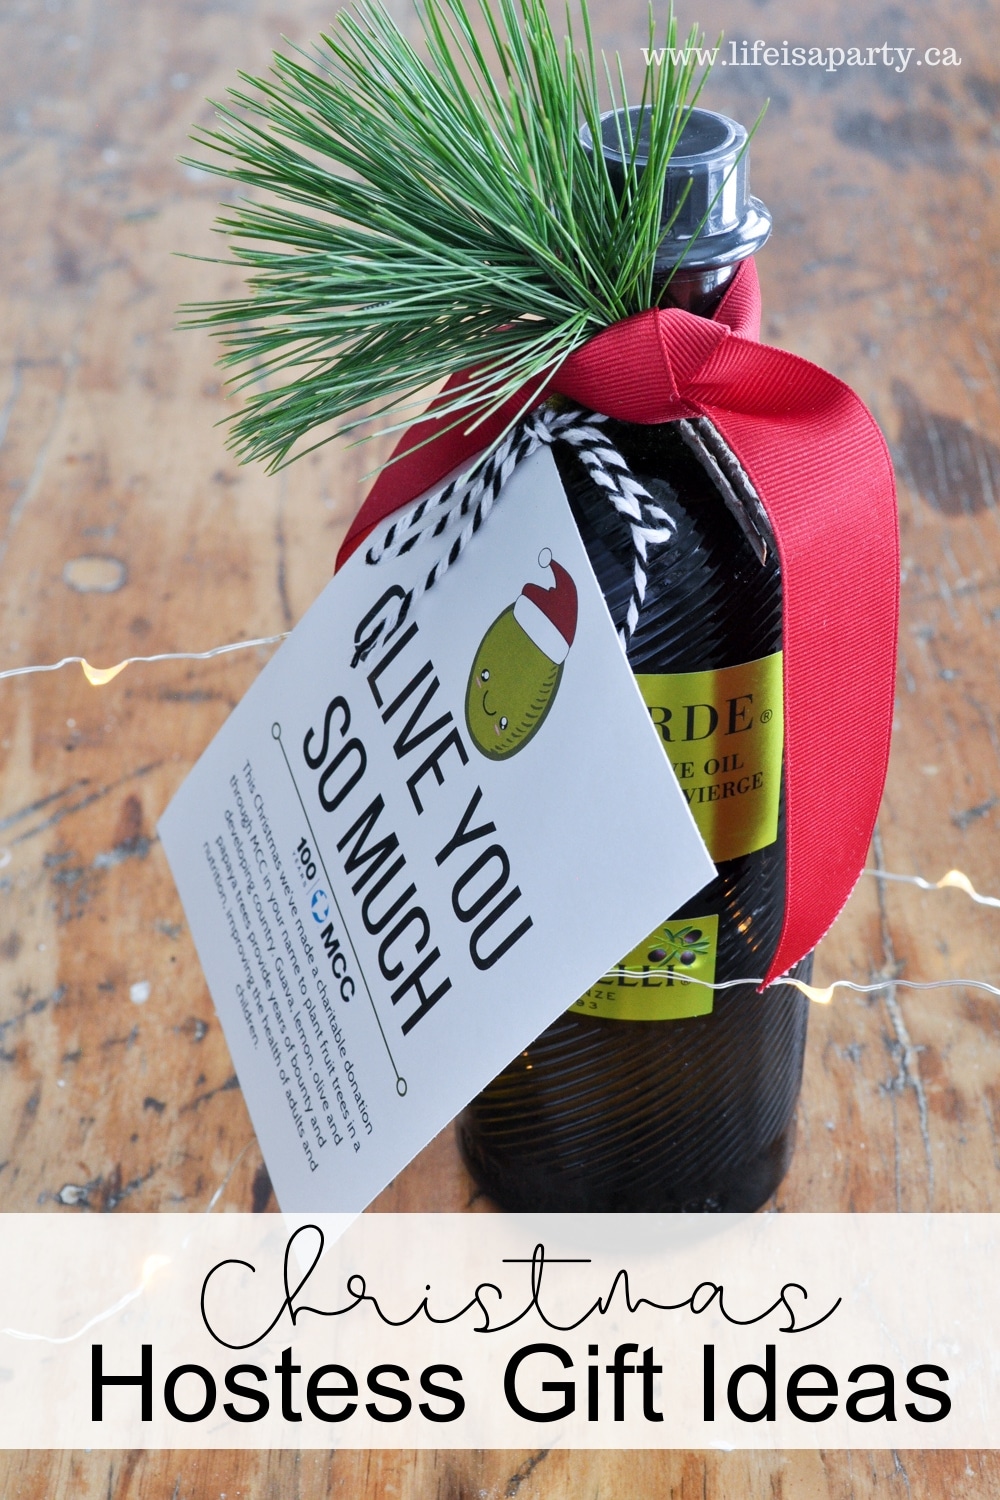 Christmas Hostess Gift Ideas: give charitable contributions to the developing world through MCC with funny printable gift tags, and a small gift.